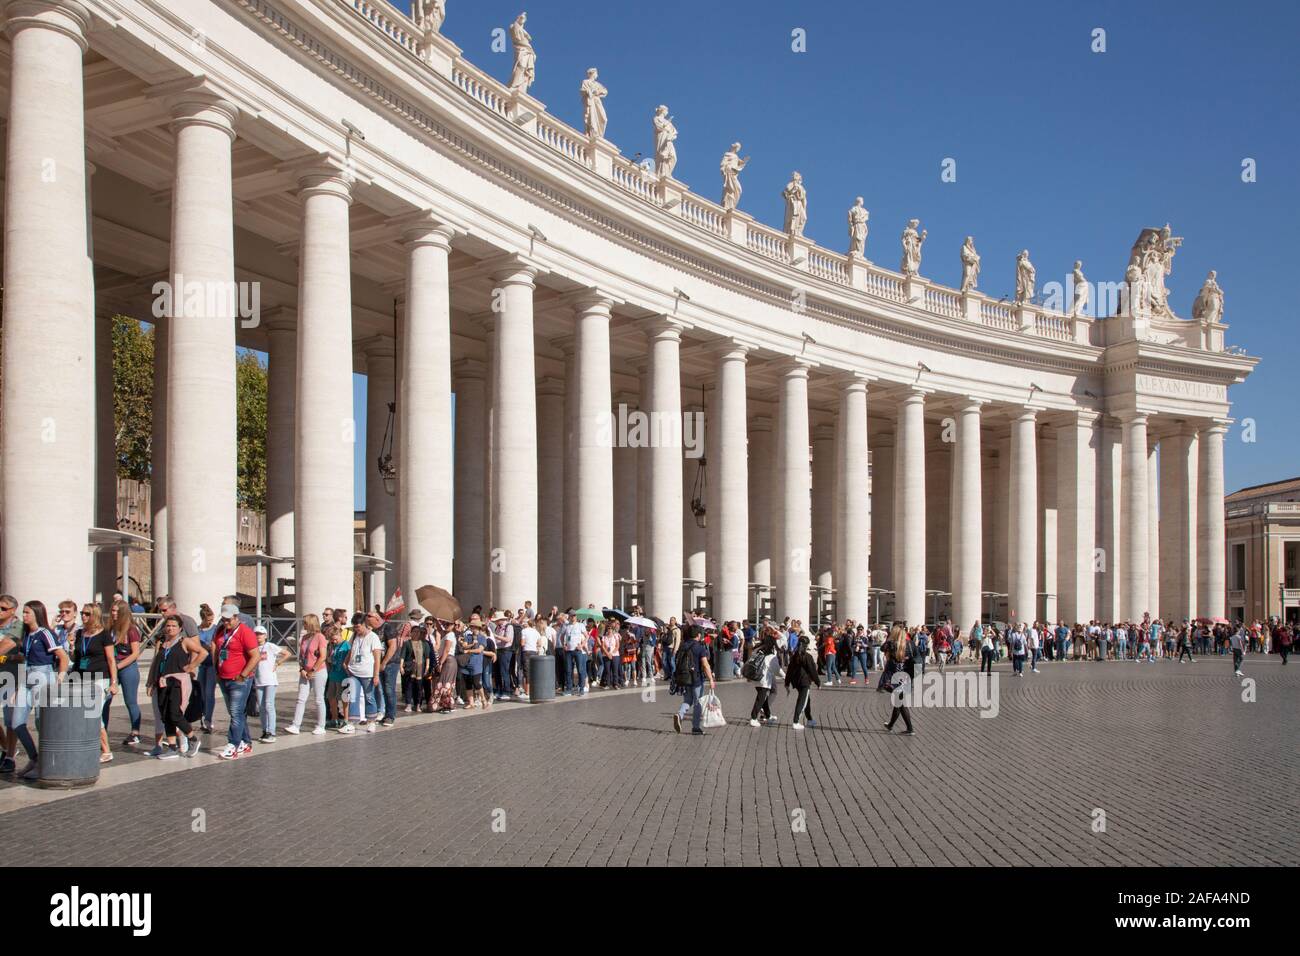 A line of visitors queue by Bernini's colonnade in St Peter's Square, waiting to get into St. Peter's Basilica, Rome Stock Photo